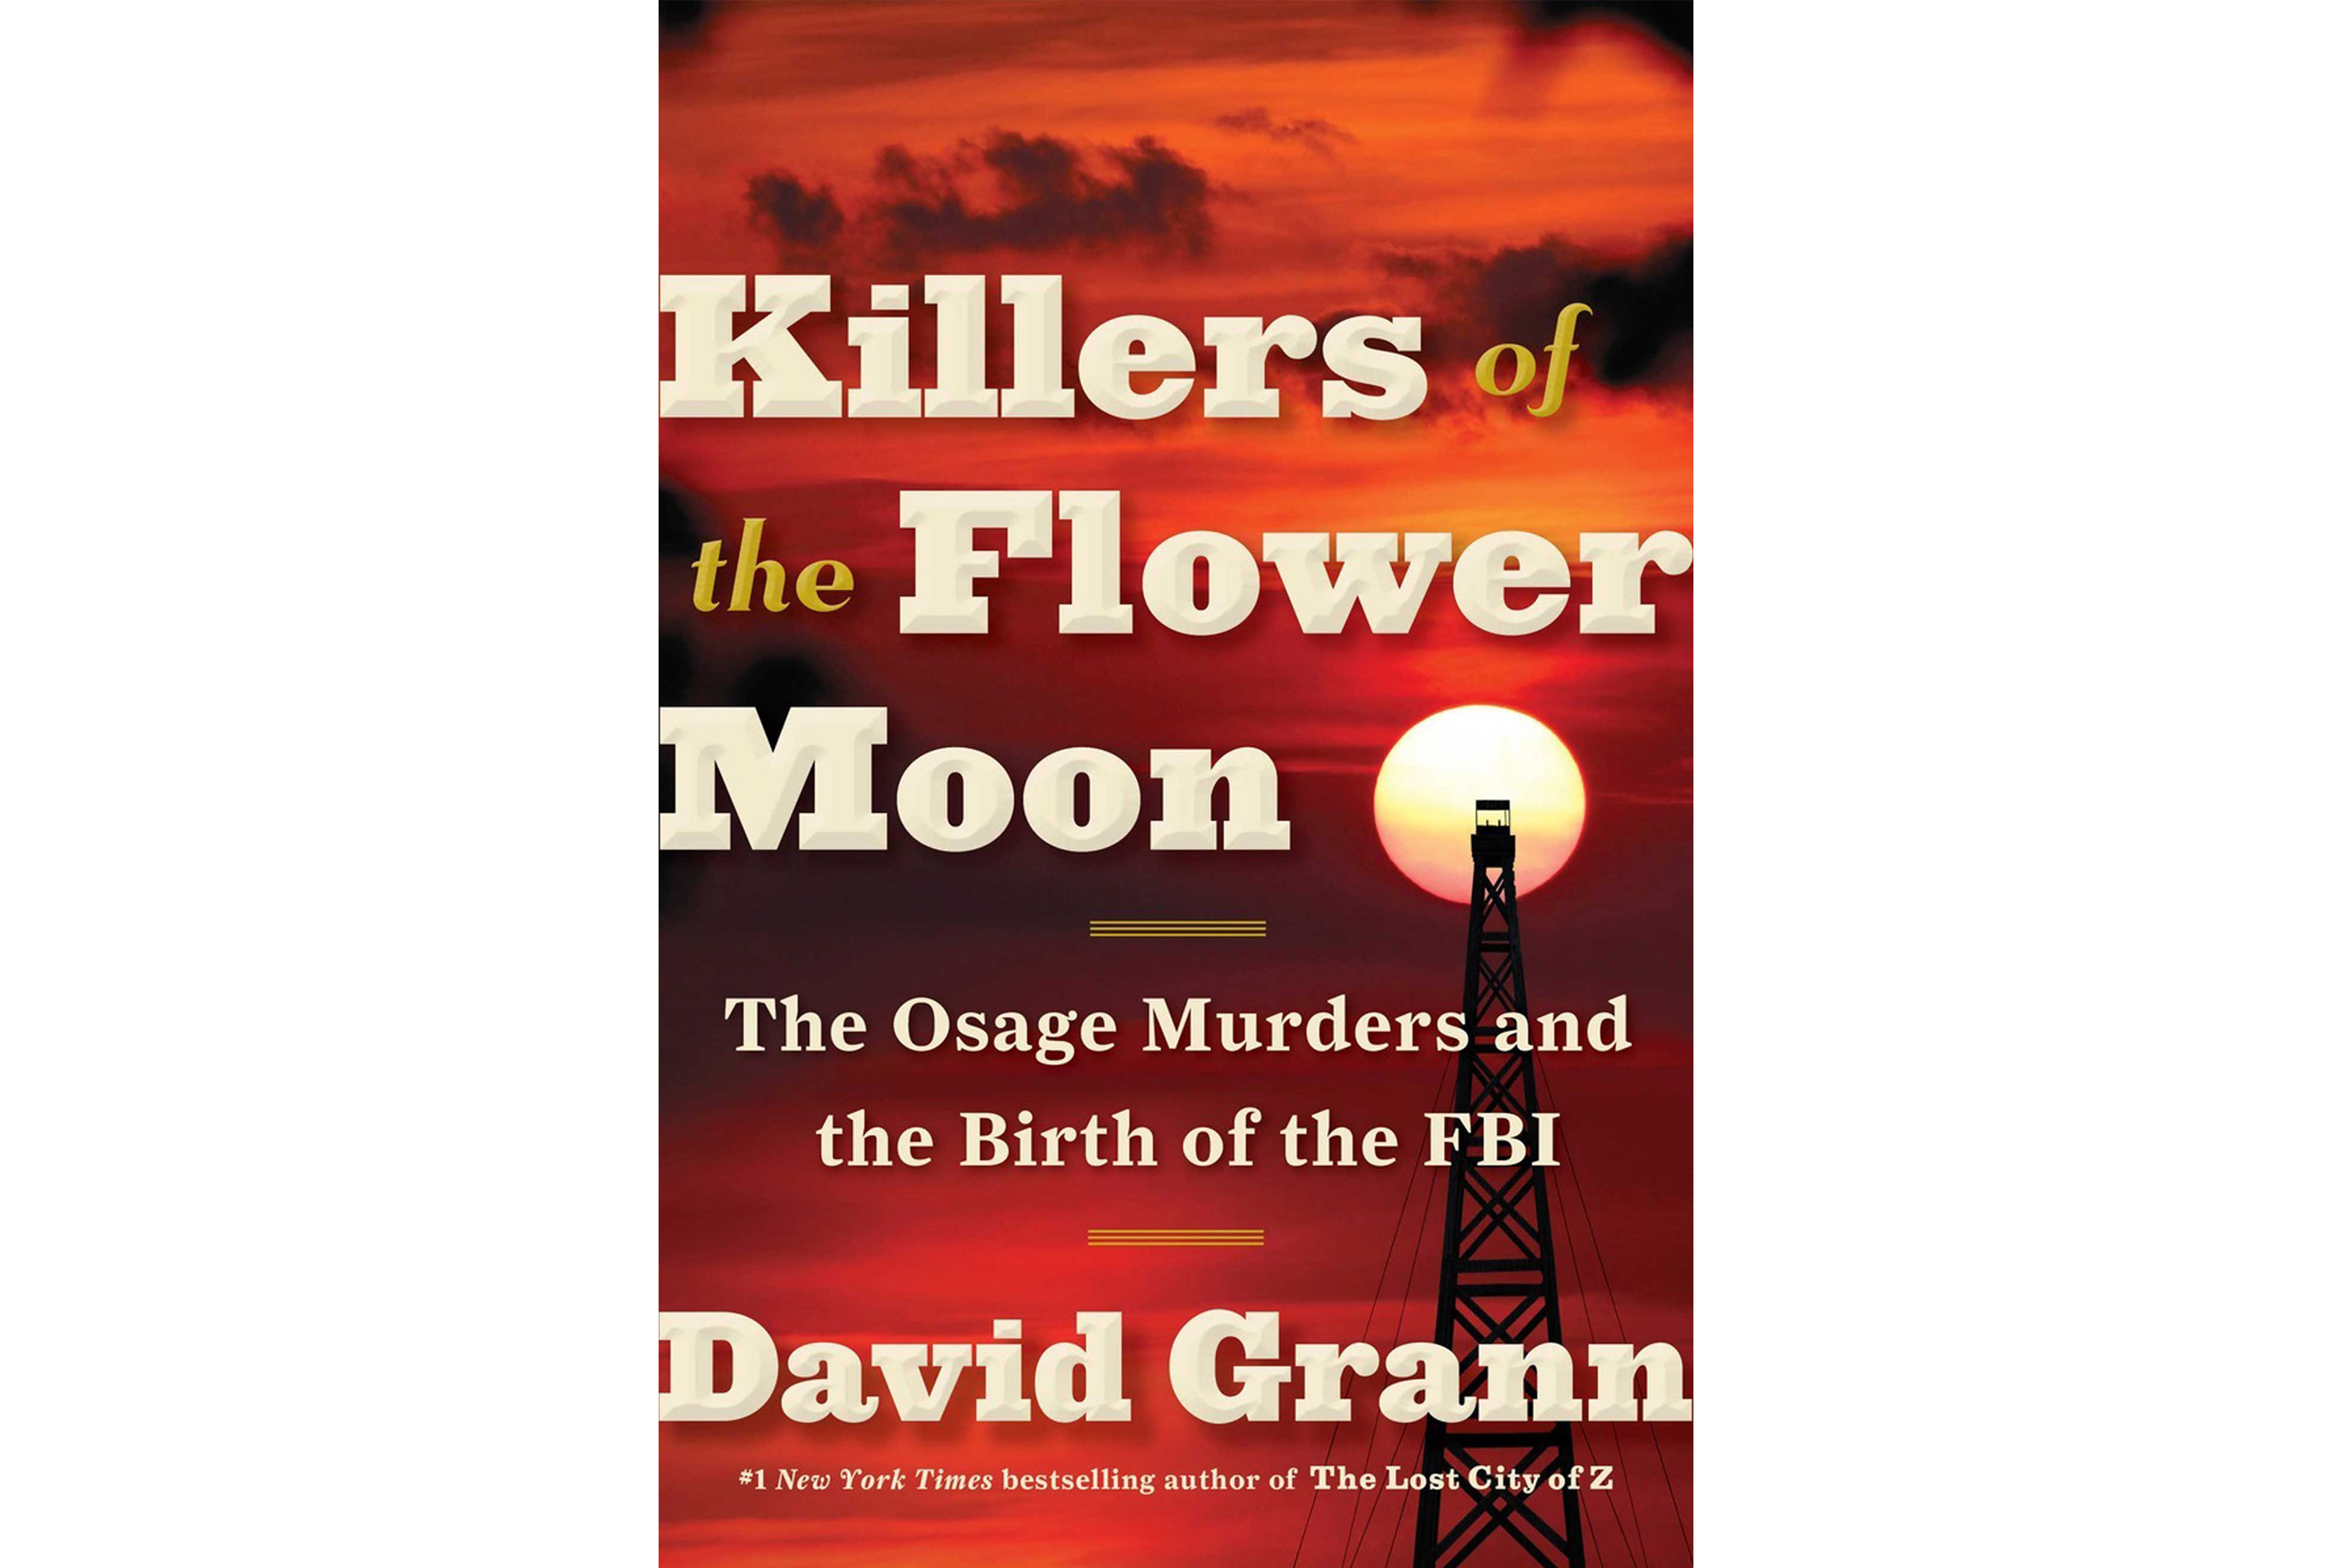 Book jacket of Killers of the Flower Moon by David Grann